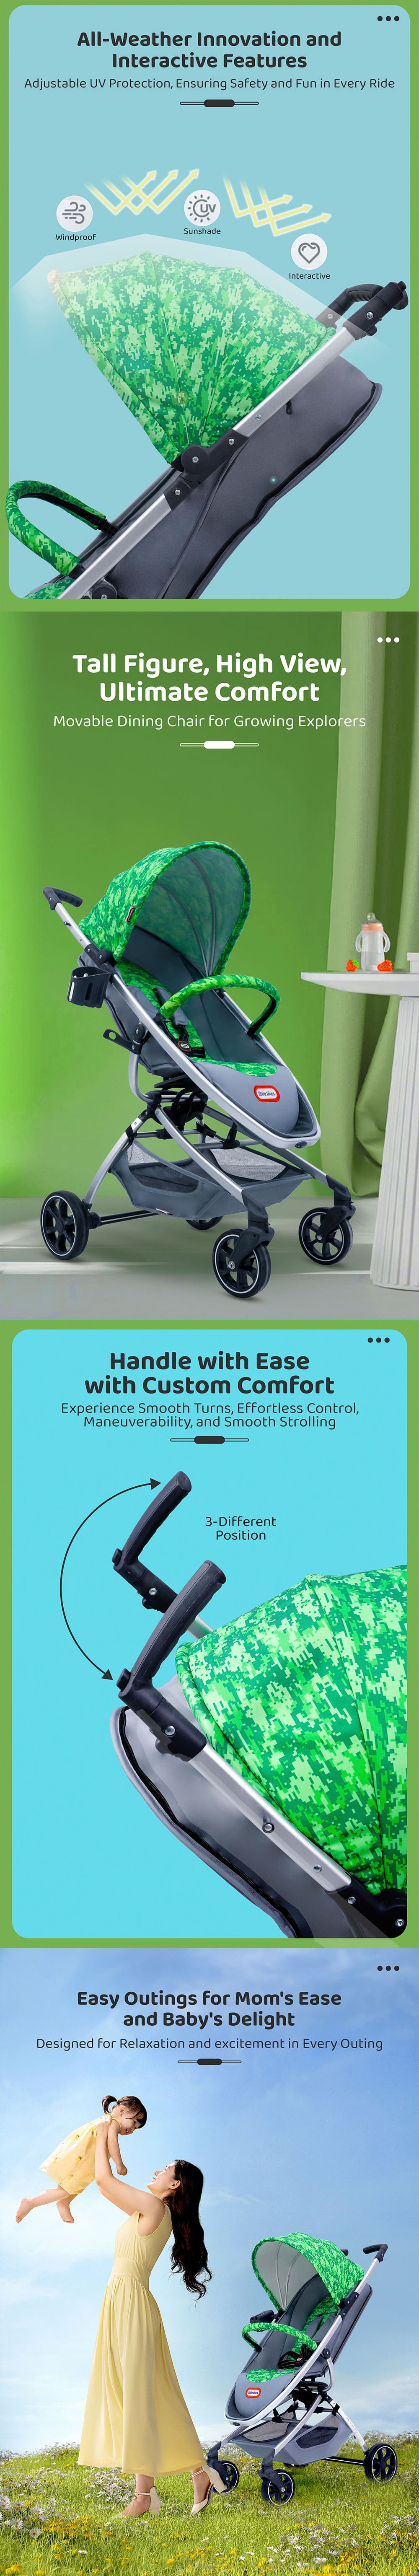 Baby Stroller with Extended Canopy